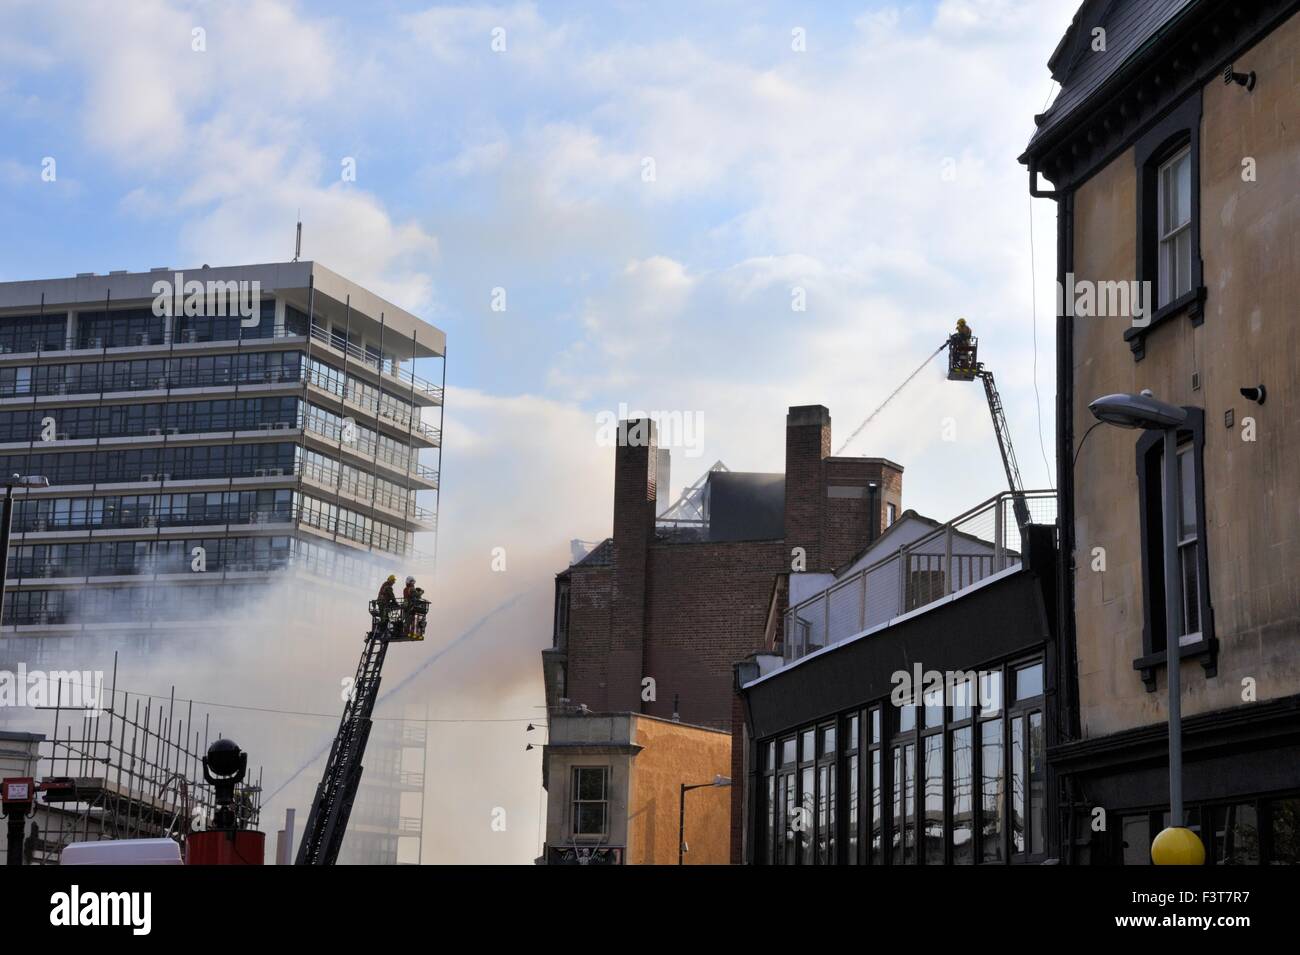 Bristol, UK. 12th October, 2015. A major fire started about 13:00hr in University of Bristol Student accommodation, 33 Colston Street, Bristol, England, 12 October 2015, tackled by Avon Fire & Rescue services with two turntable ladder fire engines and more than four other engines. The location is between the Colston Hall and Griffin pub near the junction of Colston Street and Trenchard Street and these roads have been closed to both vehicles and pedestrians. The blaze has completely destroyed the whole length of roof and top floor. Credit:  Charles Stirling/Alamy Live News Stock Photo